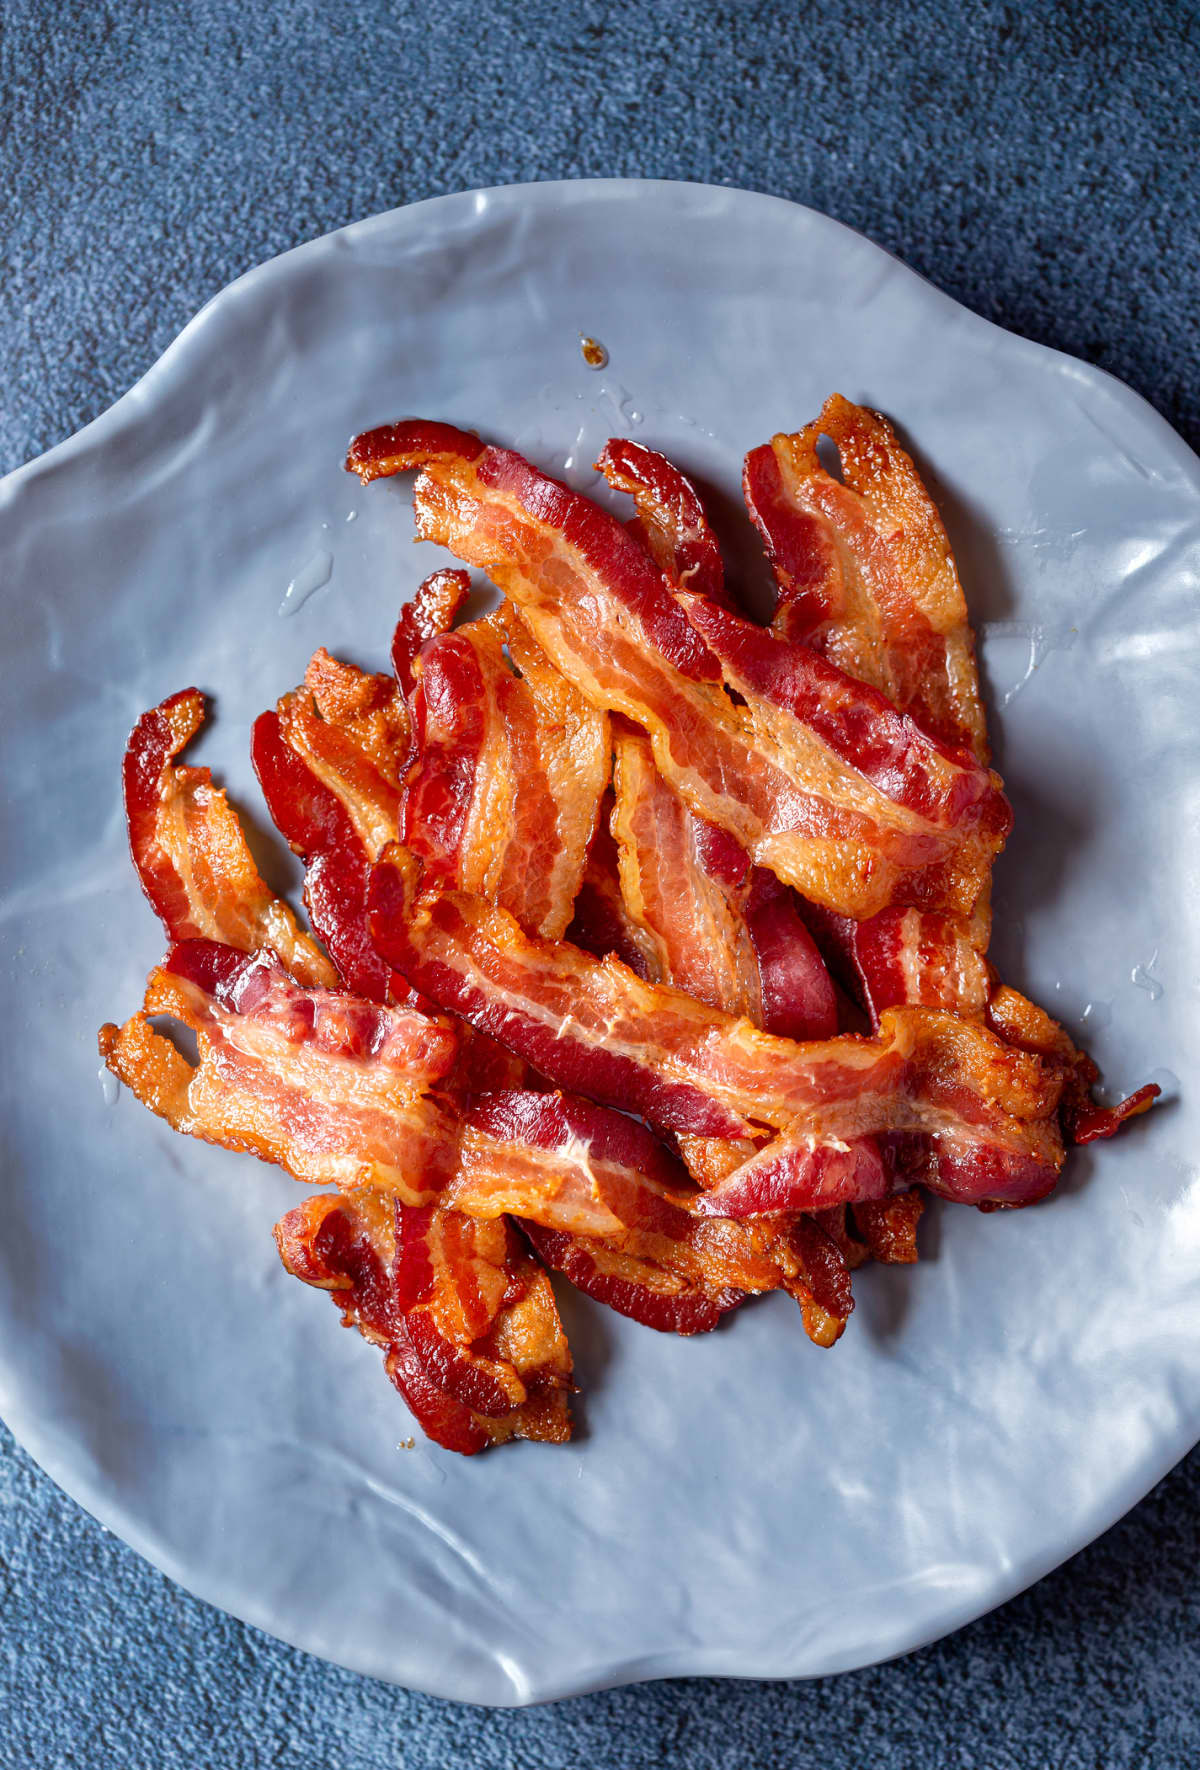 Cooked bacon, on a plate.